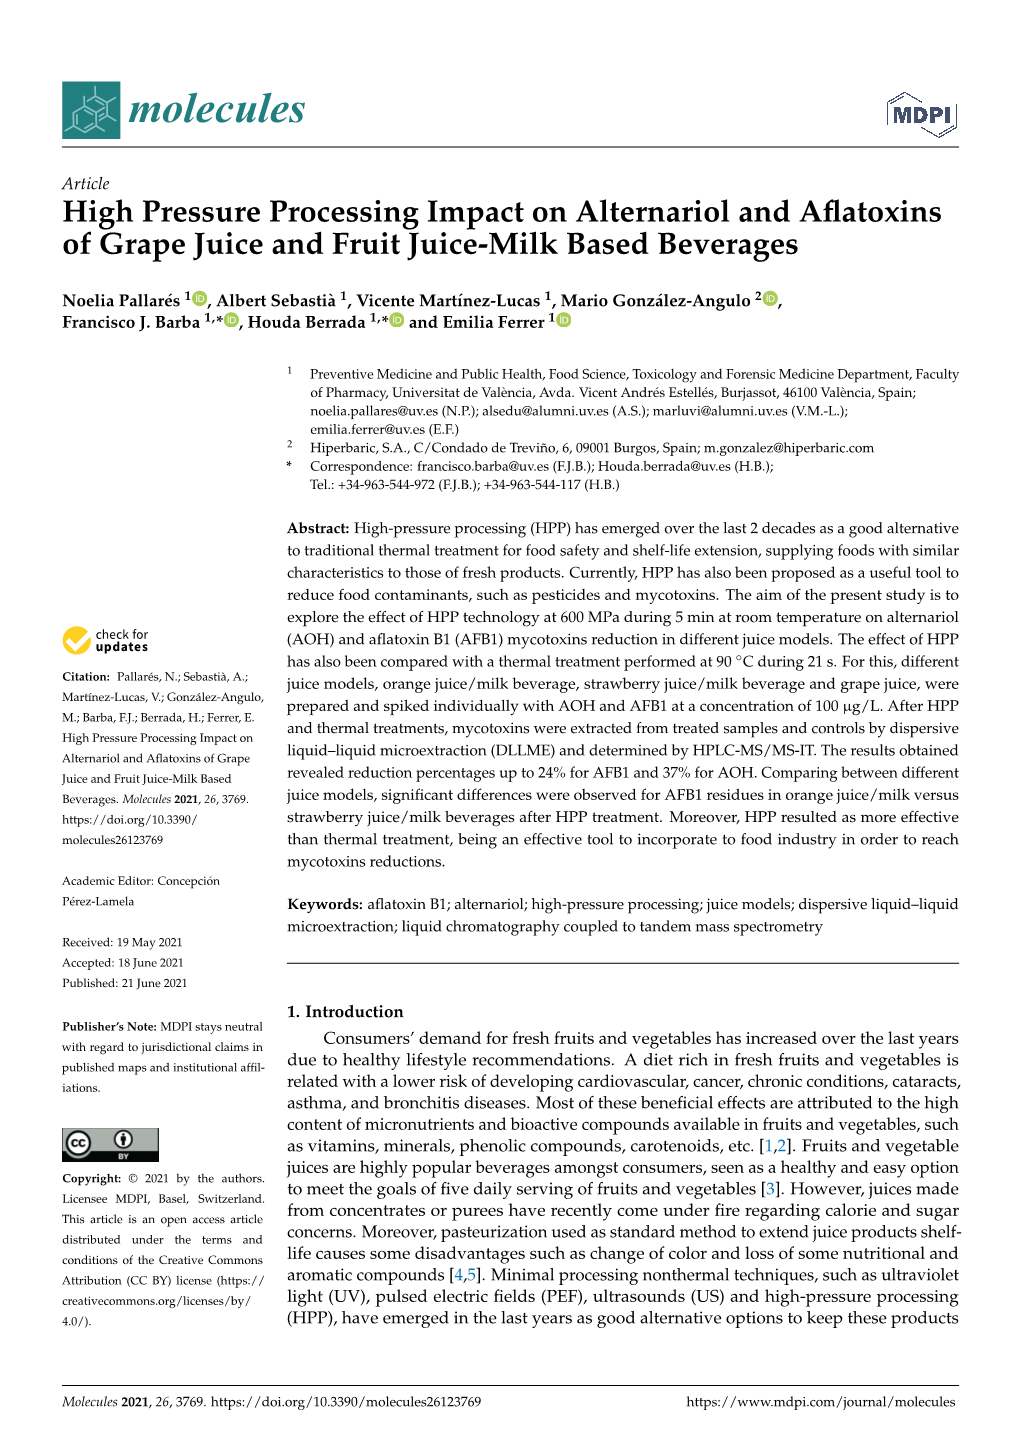 High Pressure Processing Impact on Alternariol and Aflatoxins of Grape